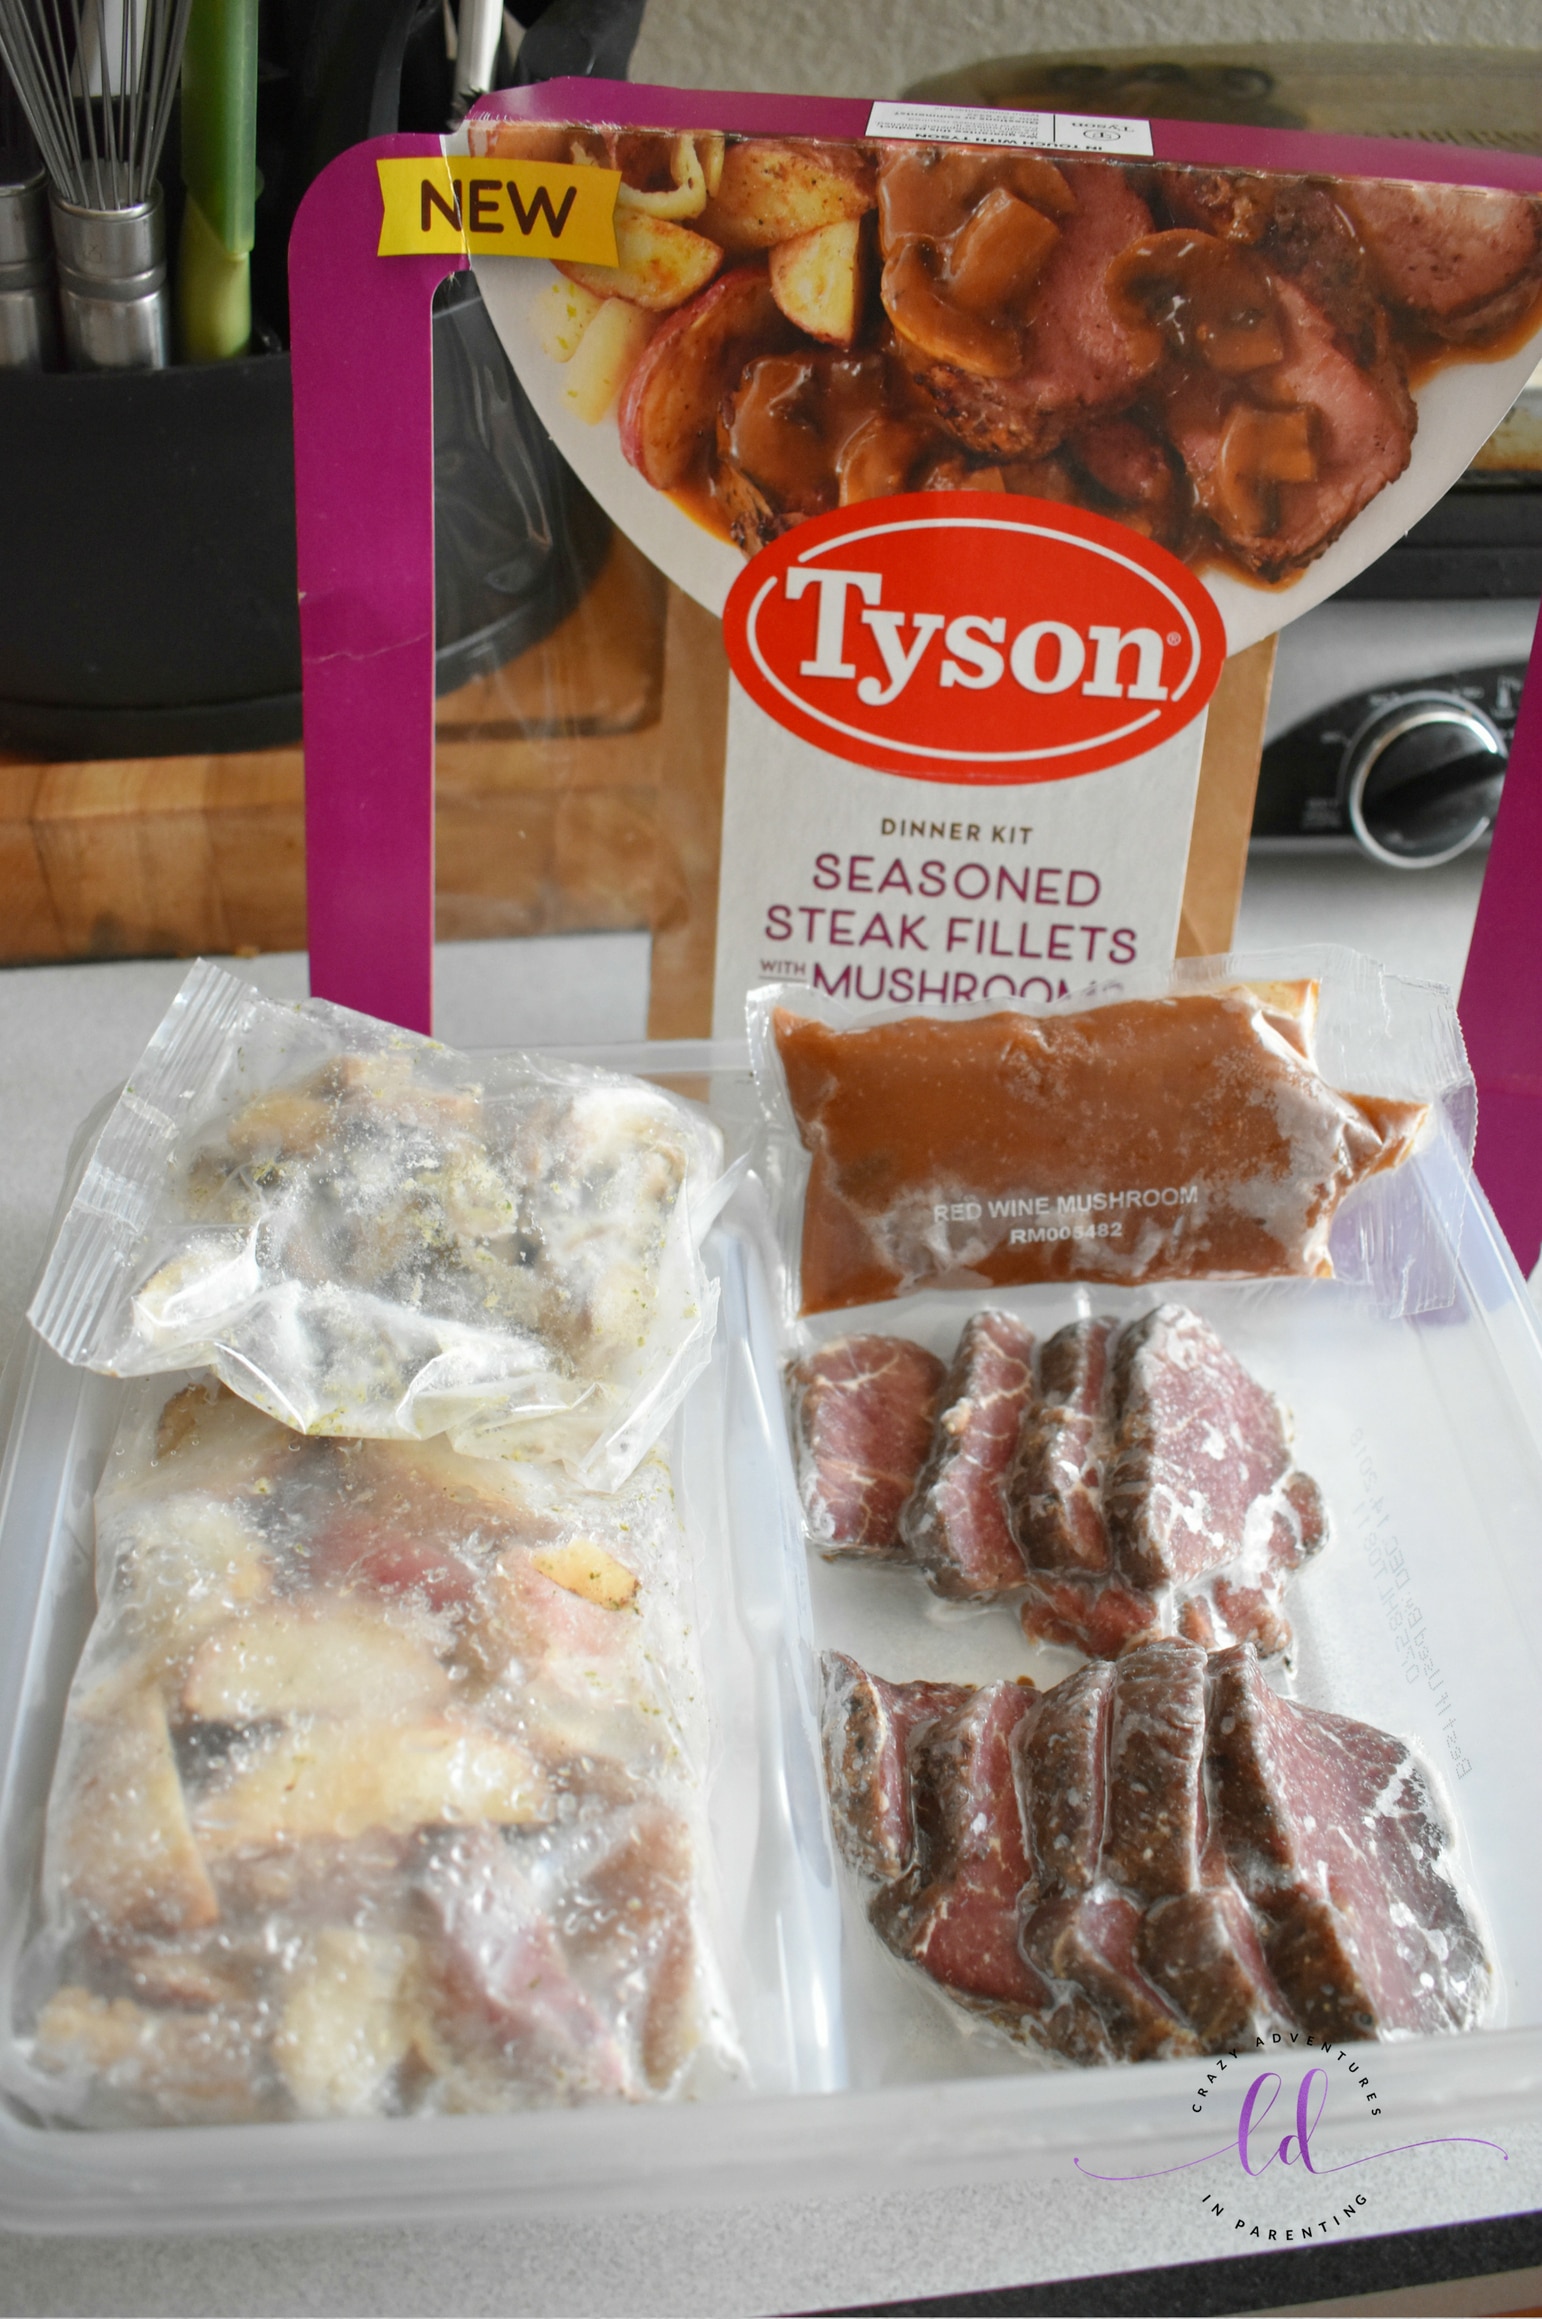 Tyson Fully Cooked Dinner and Entrée Kit - Seasoned Steak Fillet & Mushrooms contents